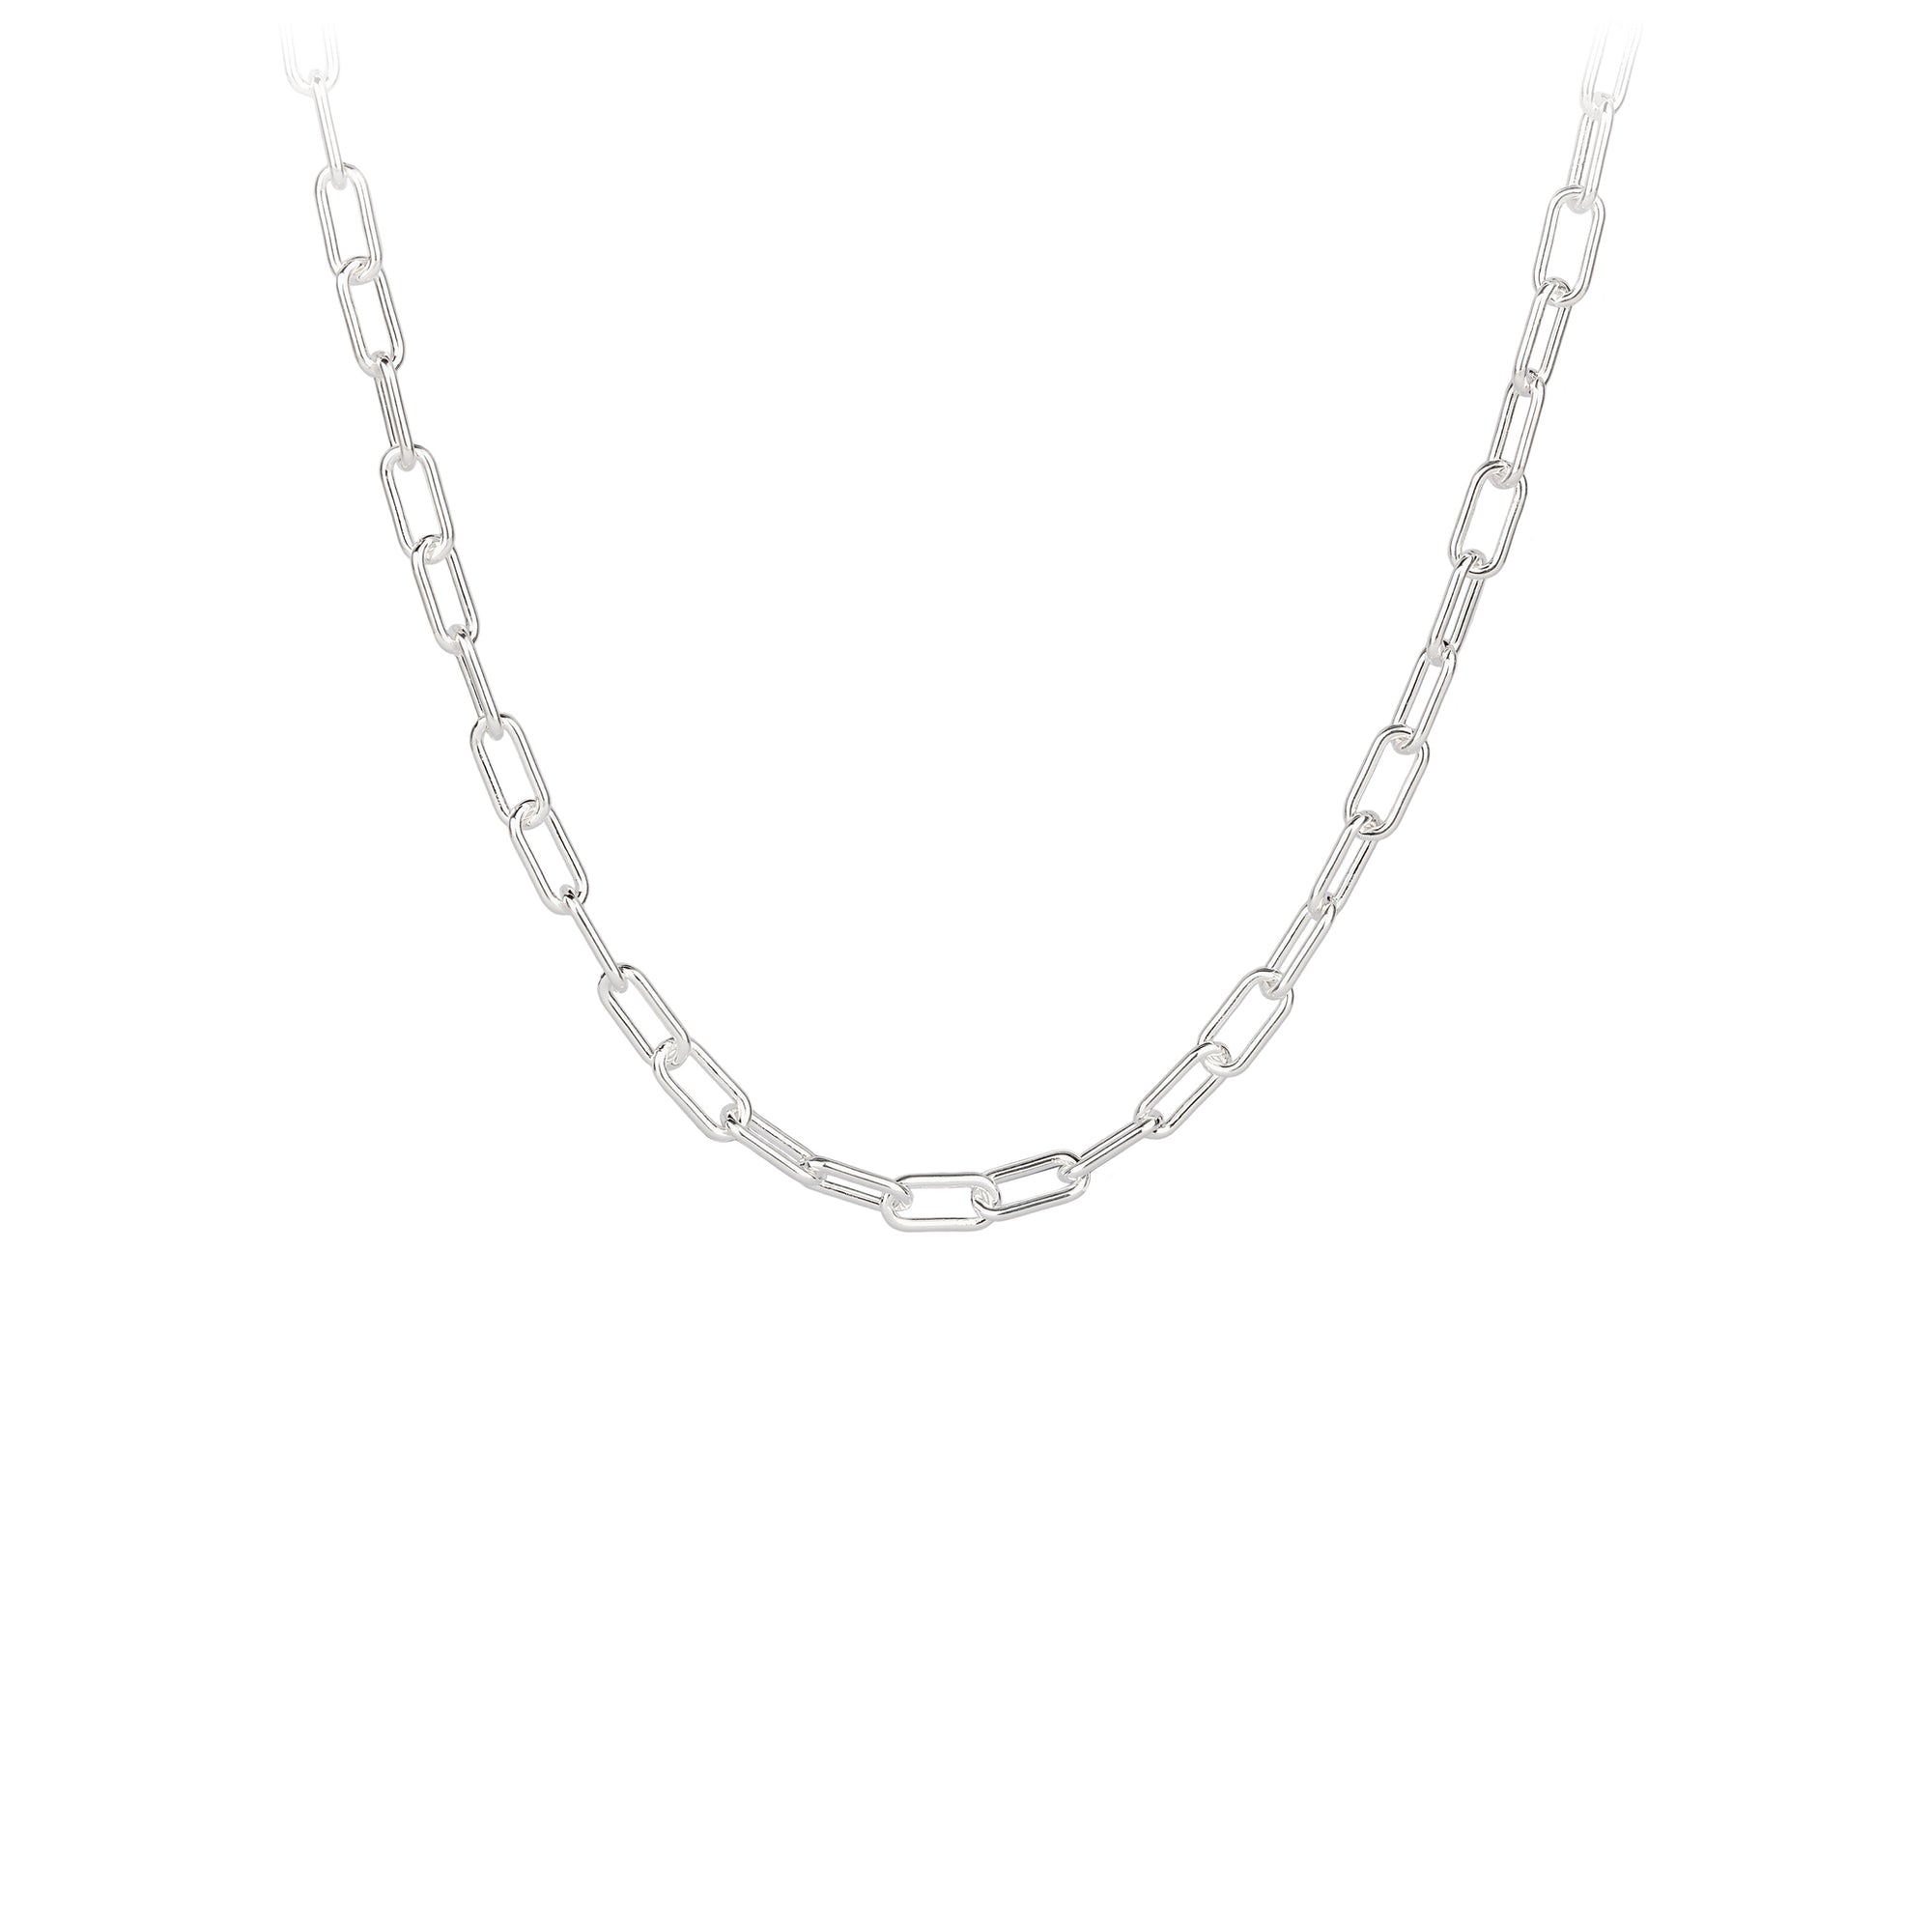 A sterling silver chain with small bright paperclip links